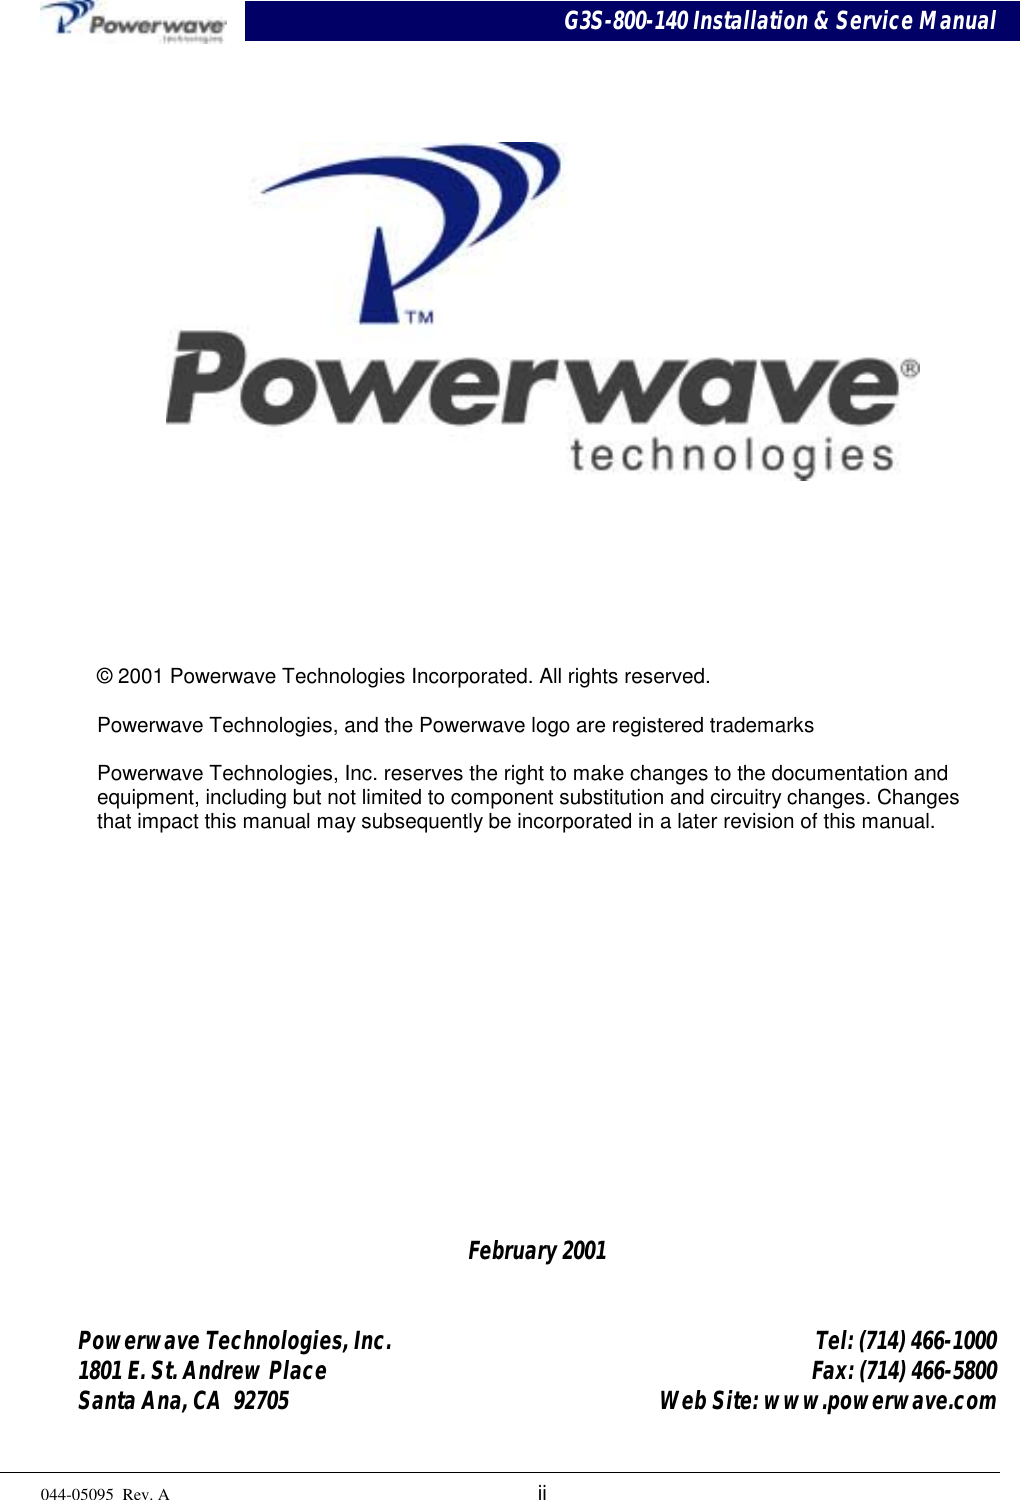 G3S-800-140 Installation &amp; Service Manual044-05095  Rev. A iiFebruary 2001Powerwave Technologies, Inc. Tel: (714) 466-10001801 E. St. Andrew Place Fax: (714) 466-5800Santa Ana, CA  92705 Web Site: www.powerwave.com© 2001 Powerwave Technologies Incorporated. All rights reserved.Powerwave Technologies, and the Powerwave logo are registered trademarksPowerwave Technologies, Inc. reserves the right to make changes to the documentation andequipment, including but not limited to component substitution and circuitry changes. Changesthat impact this manual may subsequently be incorporated in a later revision of this manual.